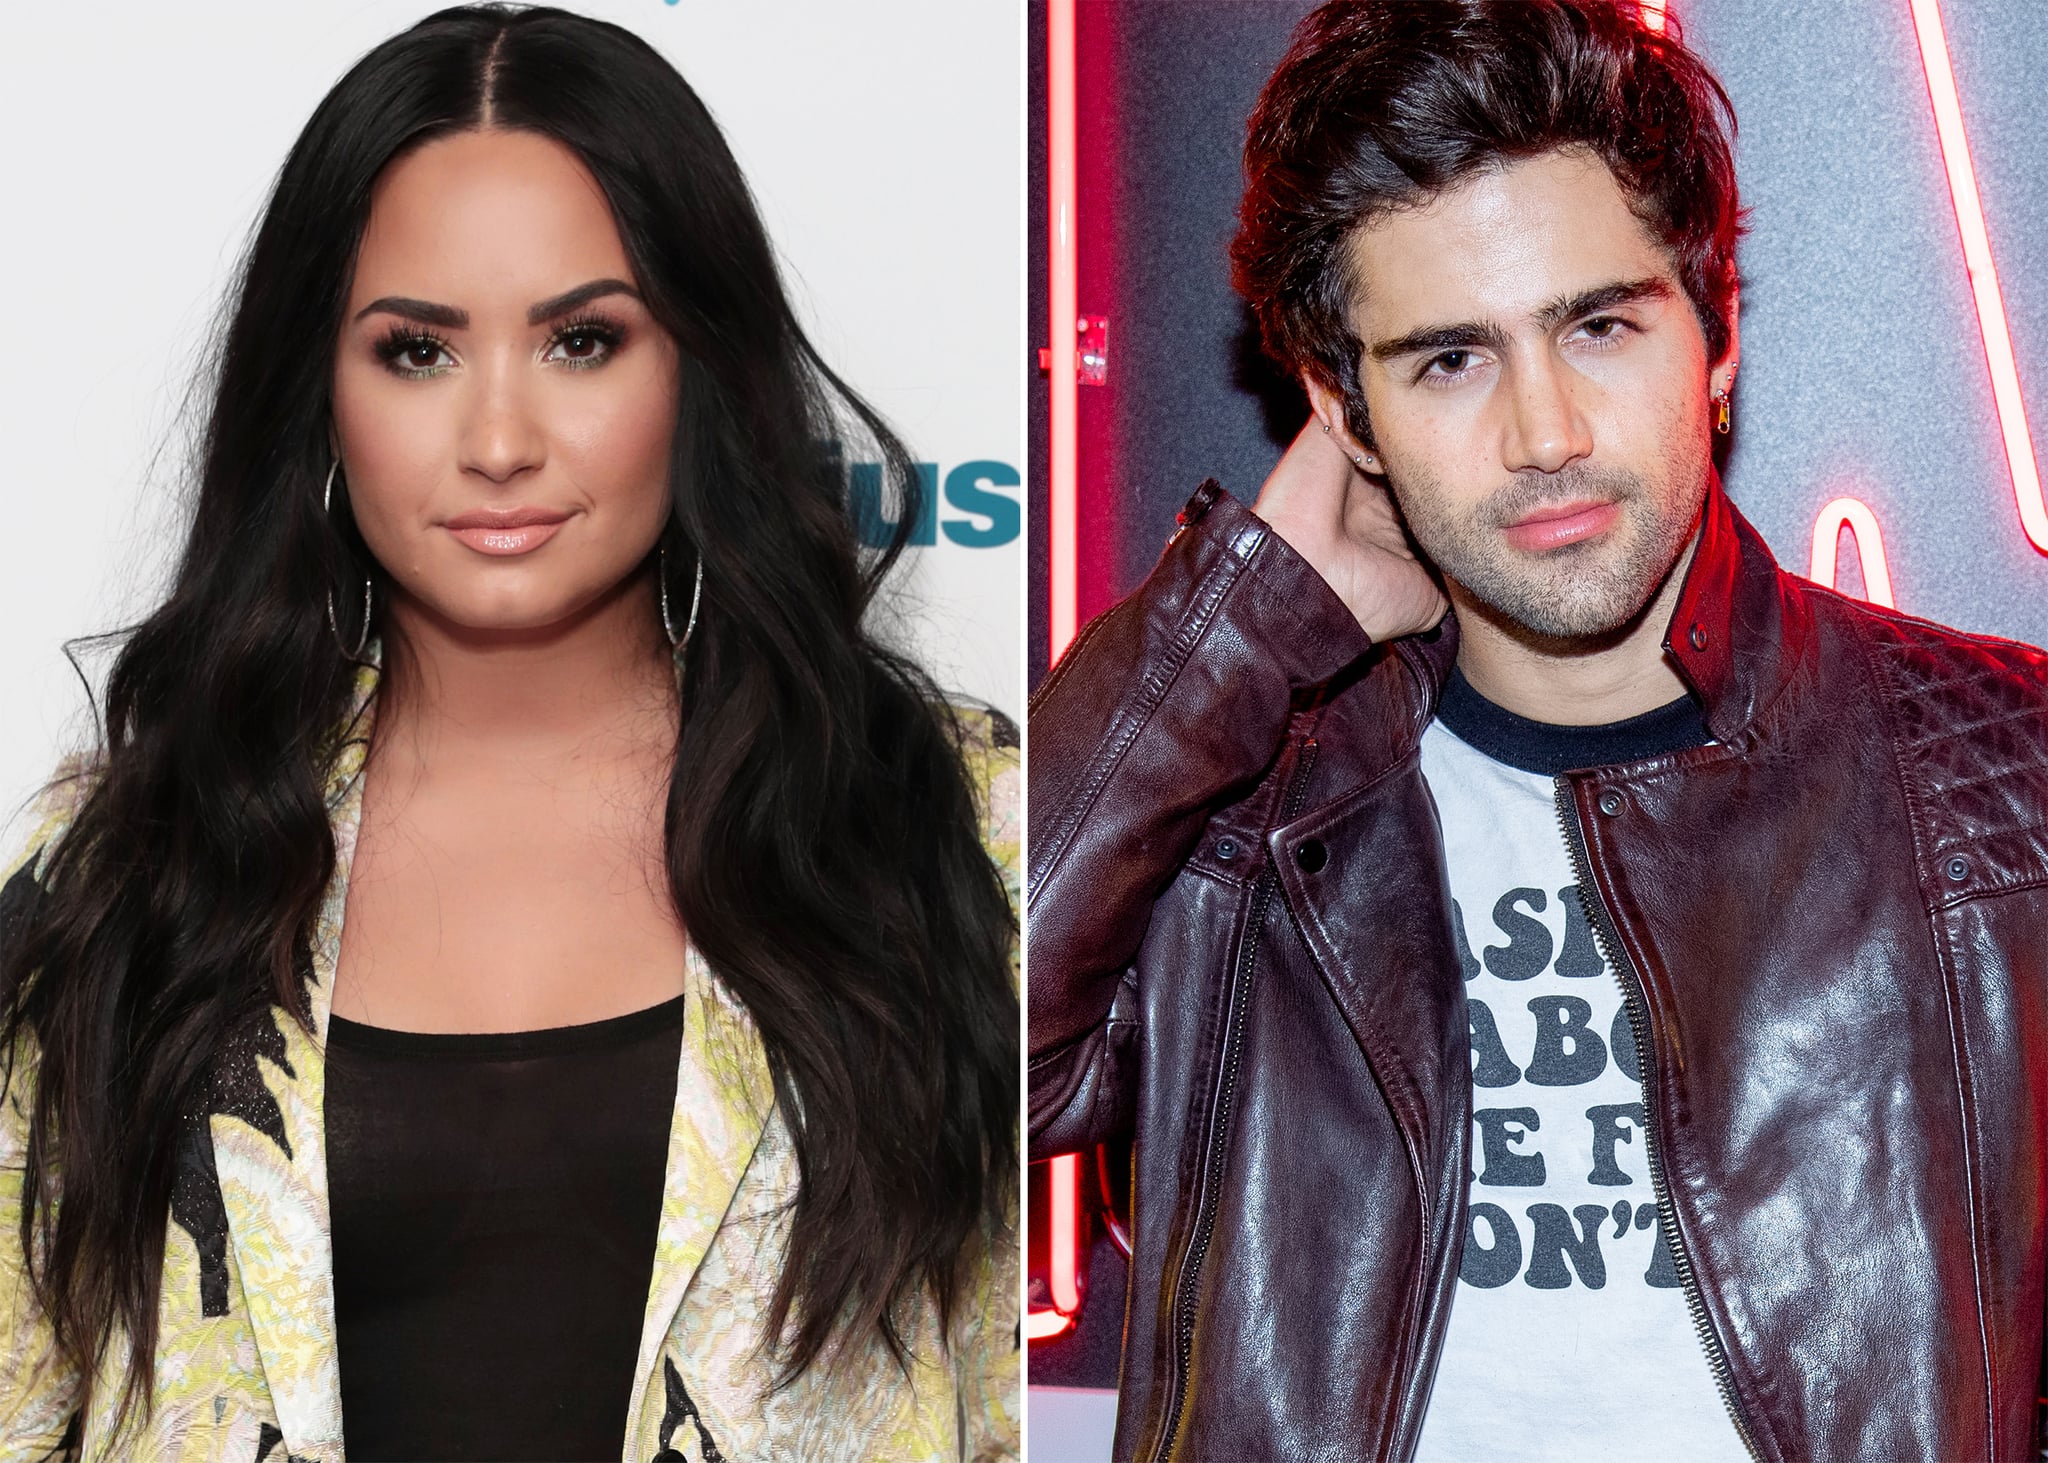 Why Did Demi Lovato and Max Ehrich Break Up?